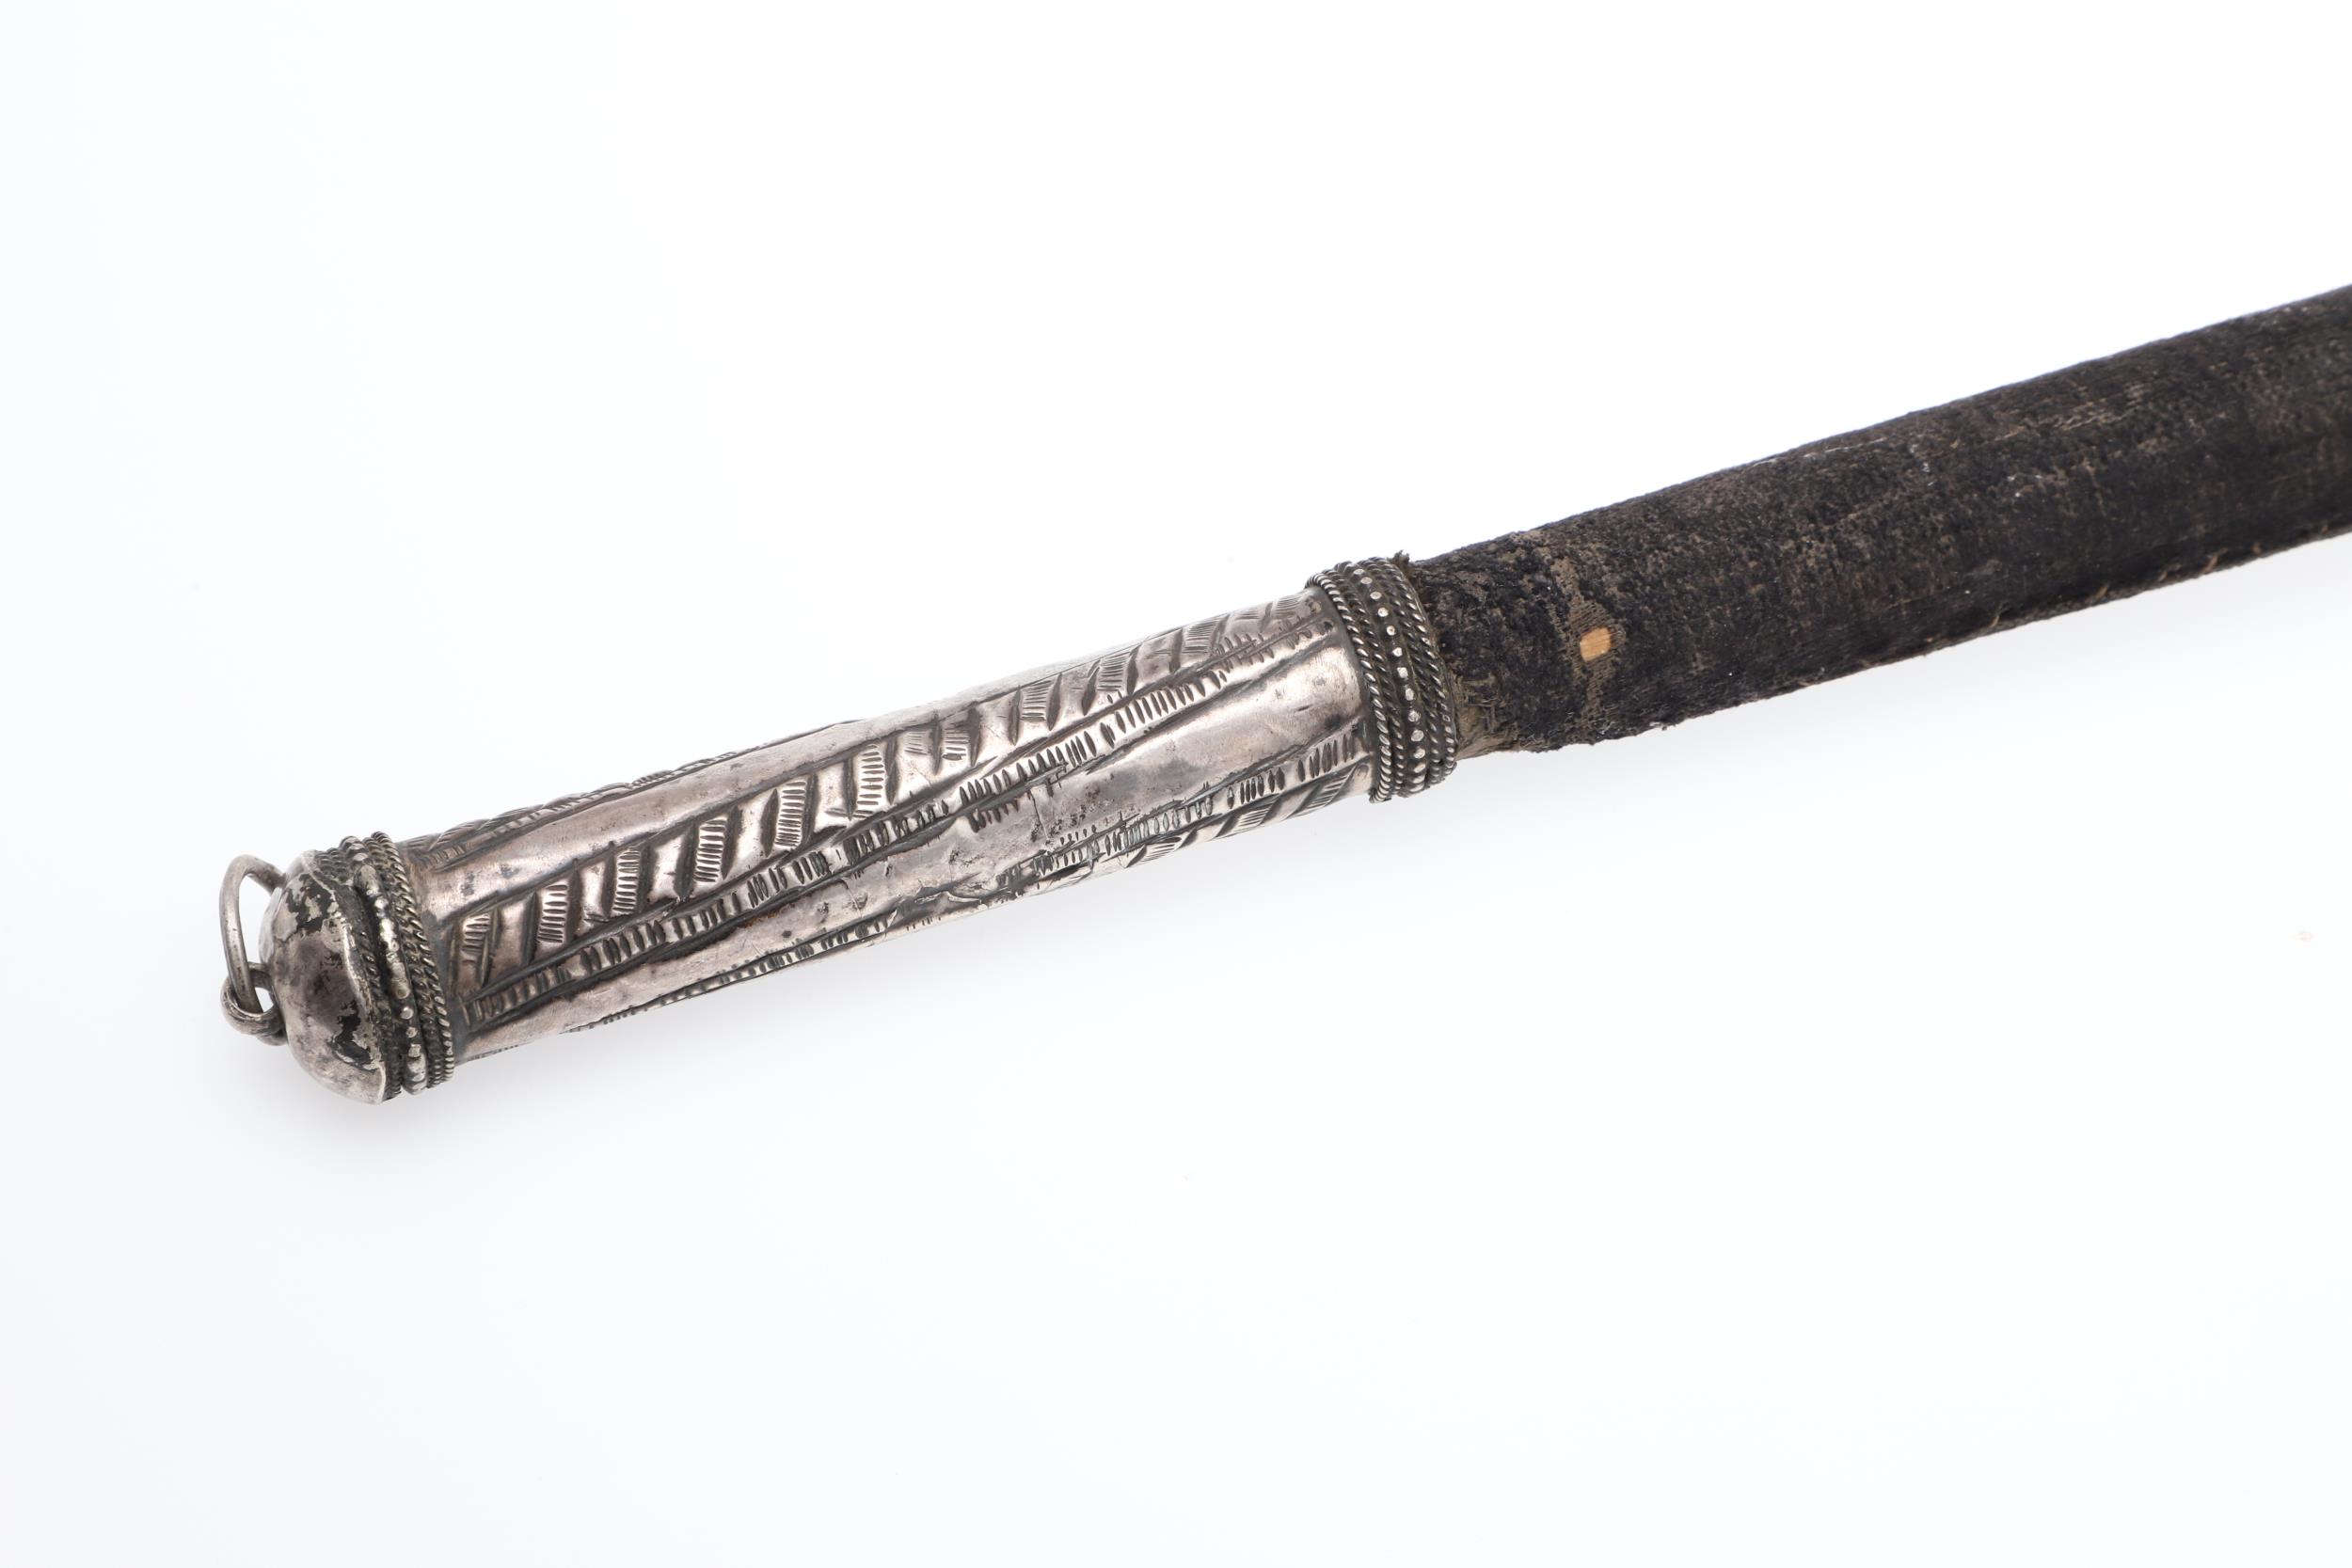 A VERY UNUSUAL SILVER MOUNTED TURKISH PUSIKAN OR GENERAL'S BATON. - Image 4 of 12